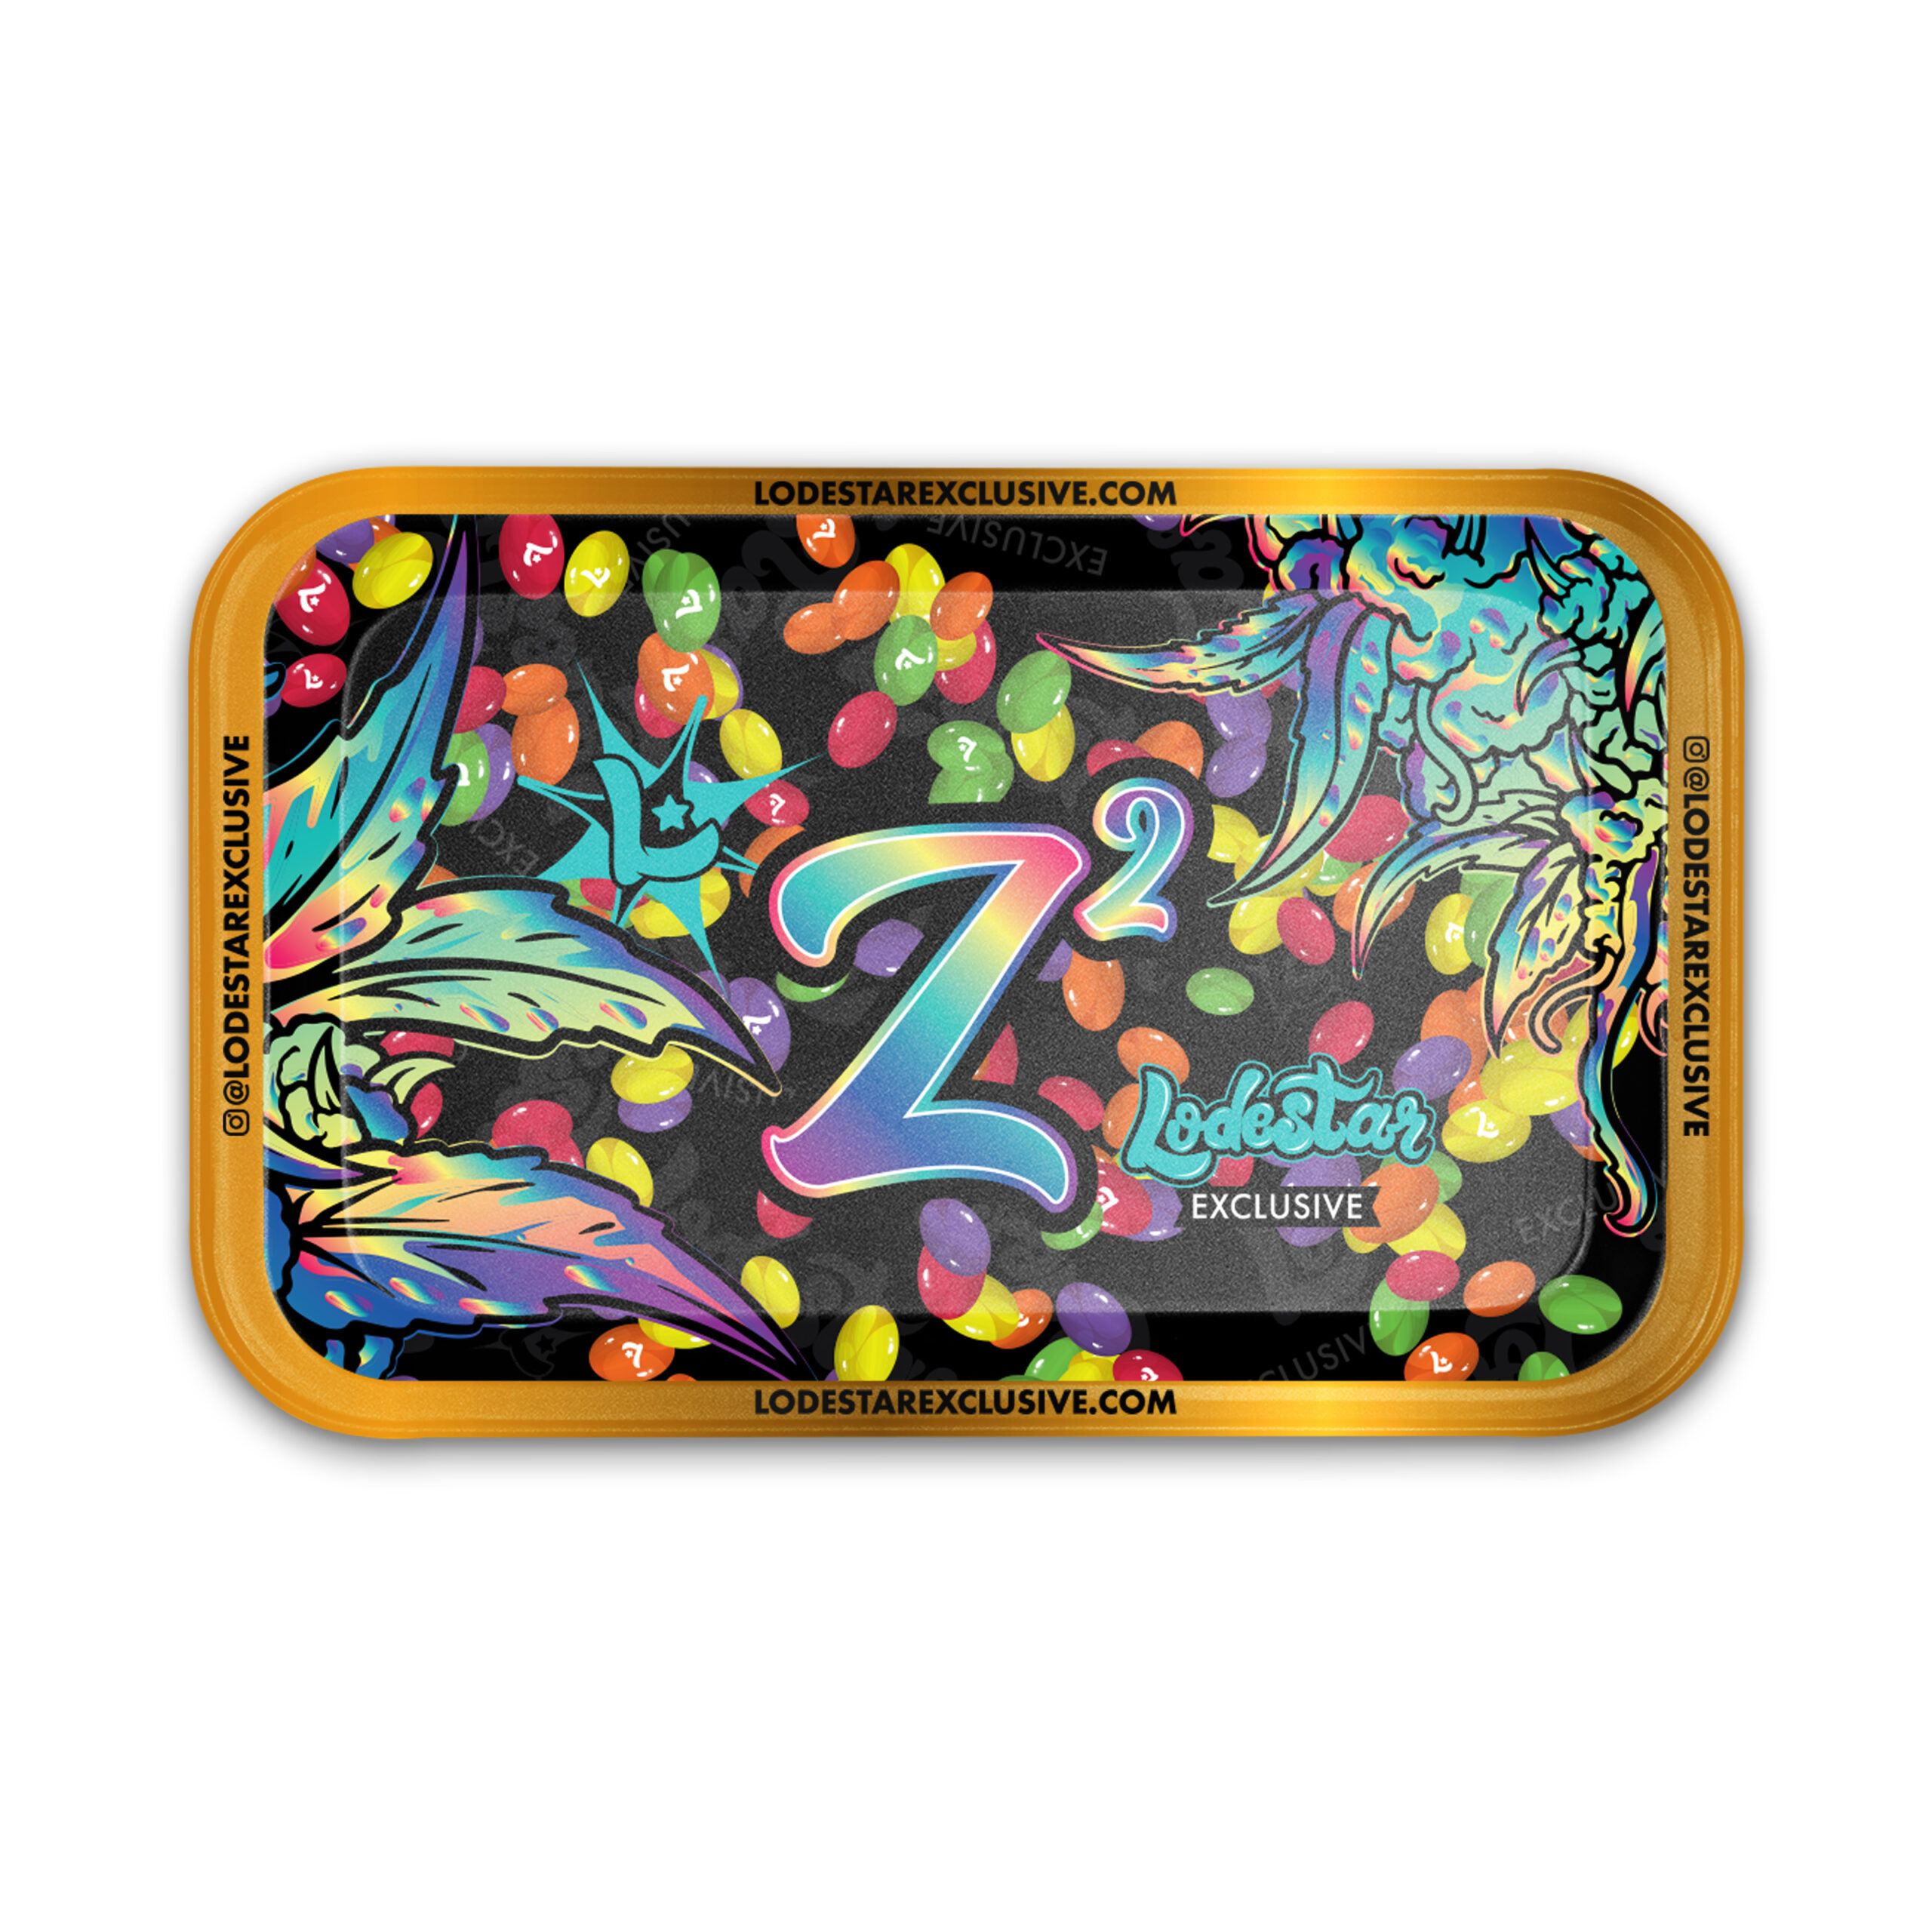 Lodestar Exclusive Rolling Tray with "Z^2" Design Product Photo